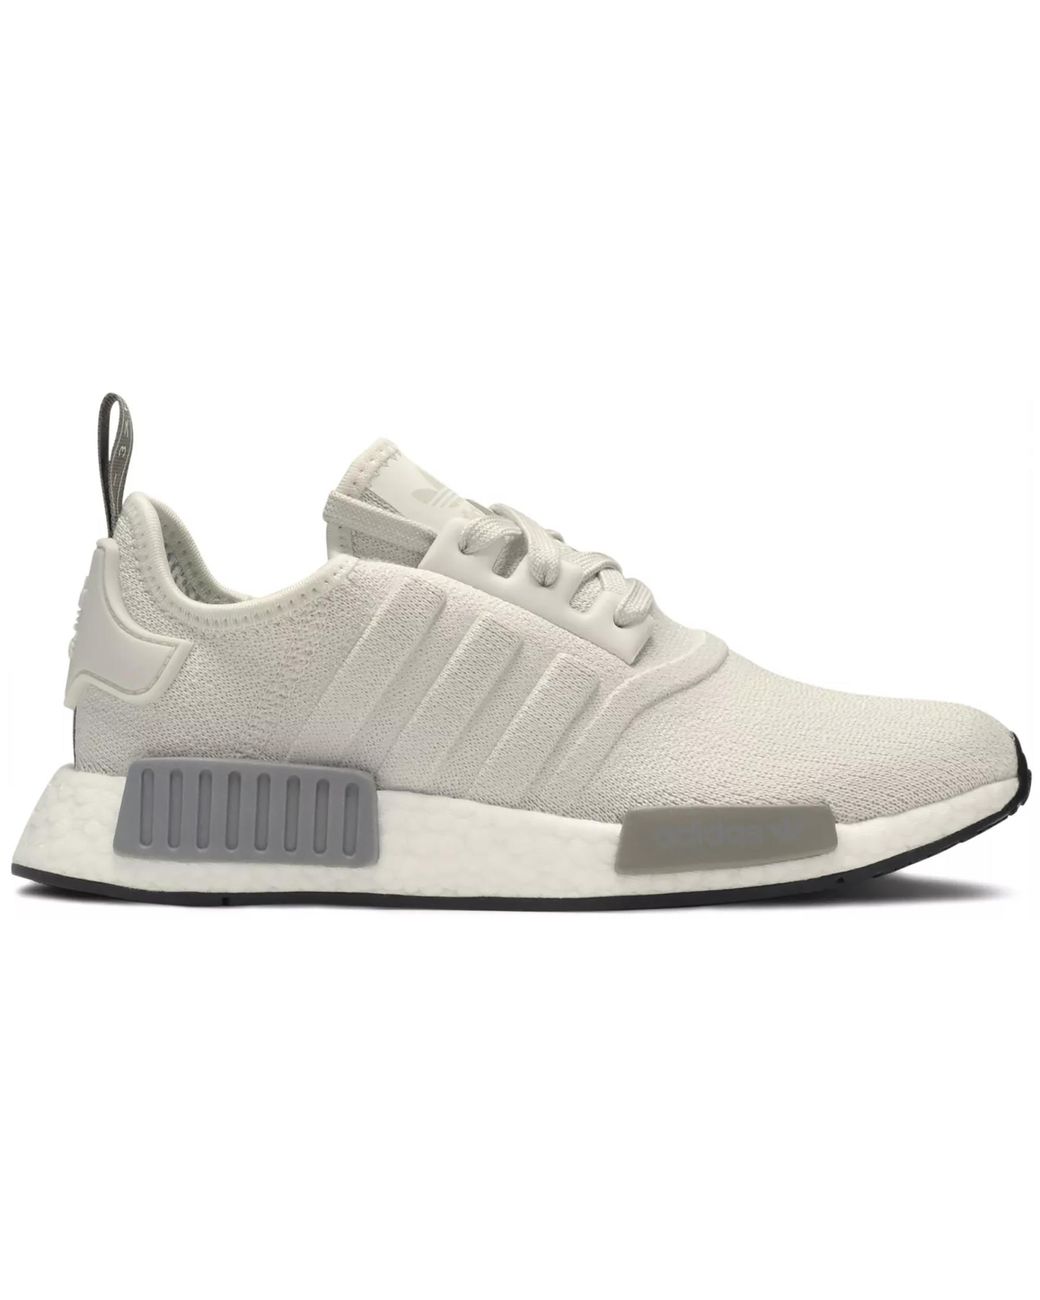 nmd r1 all white womens